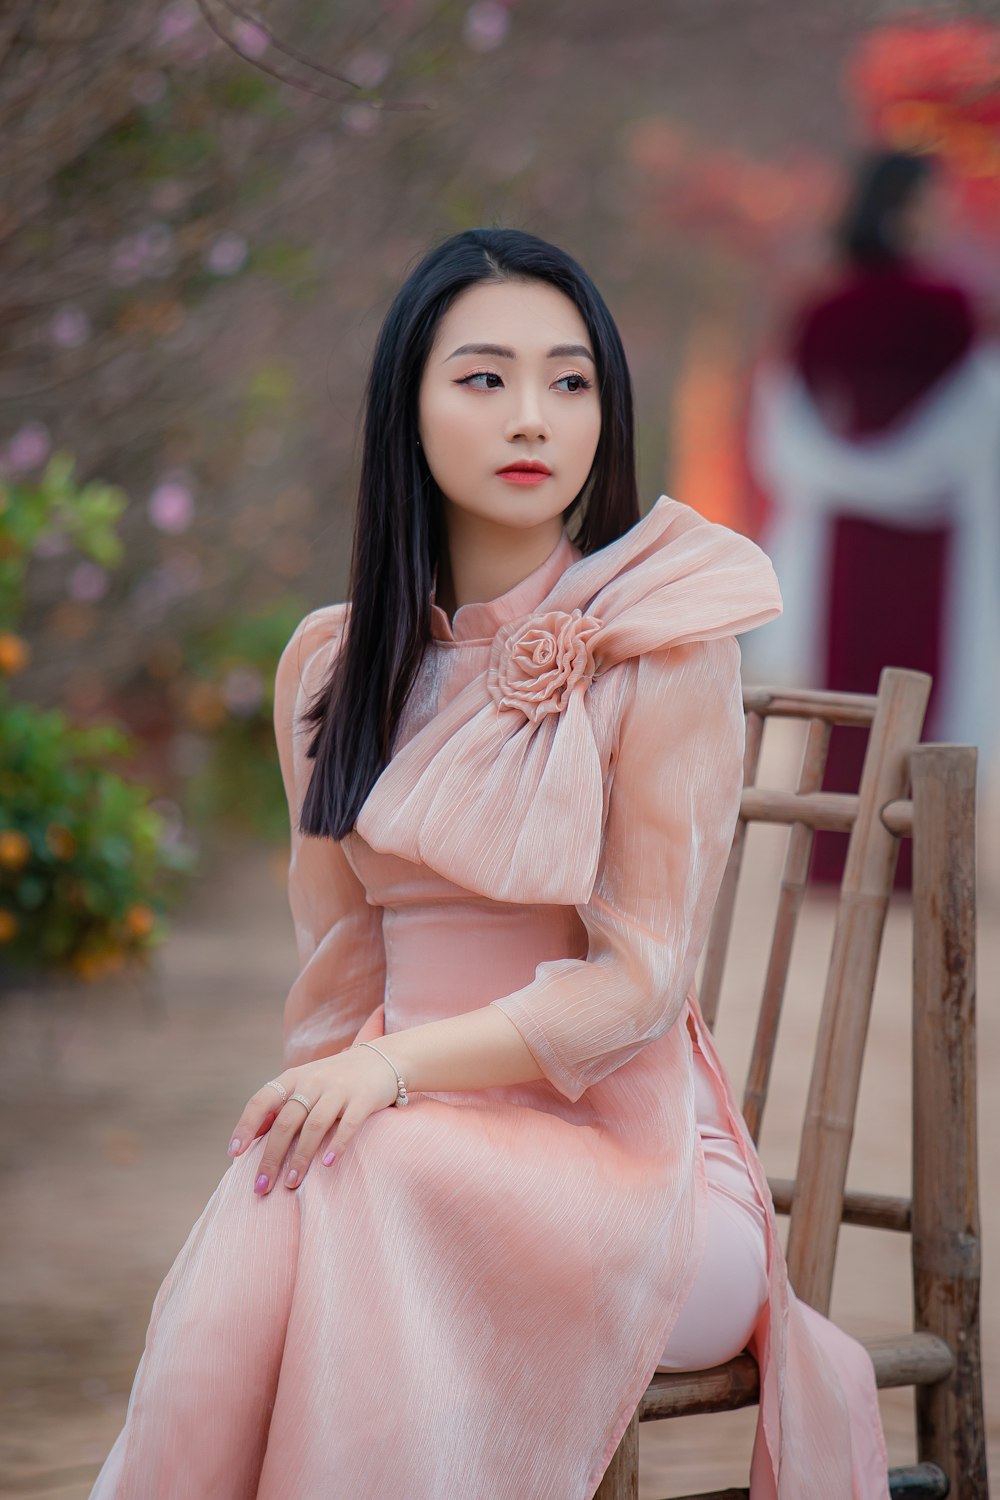 woman in pink dress sitting on brown wooden chair